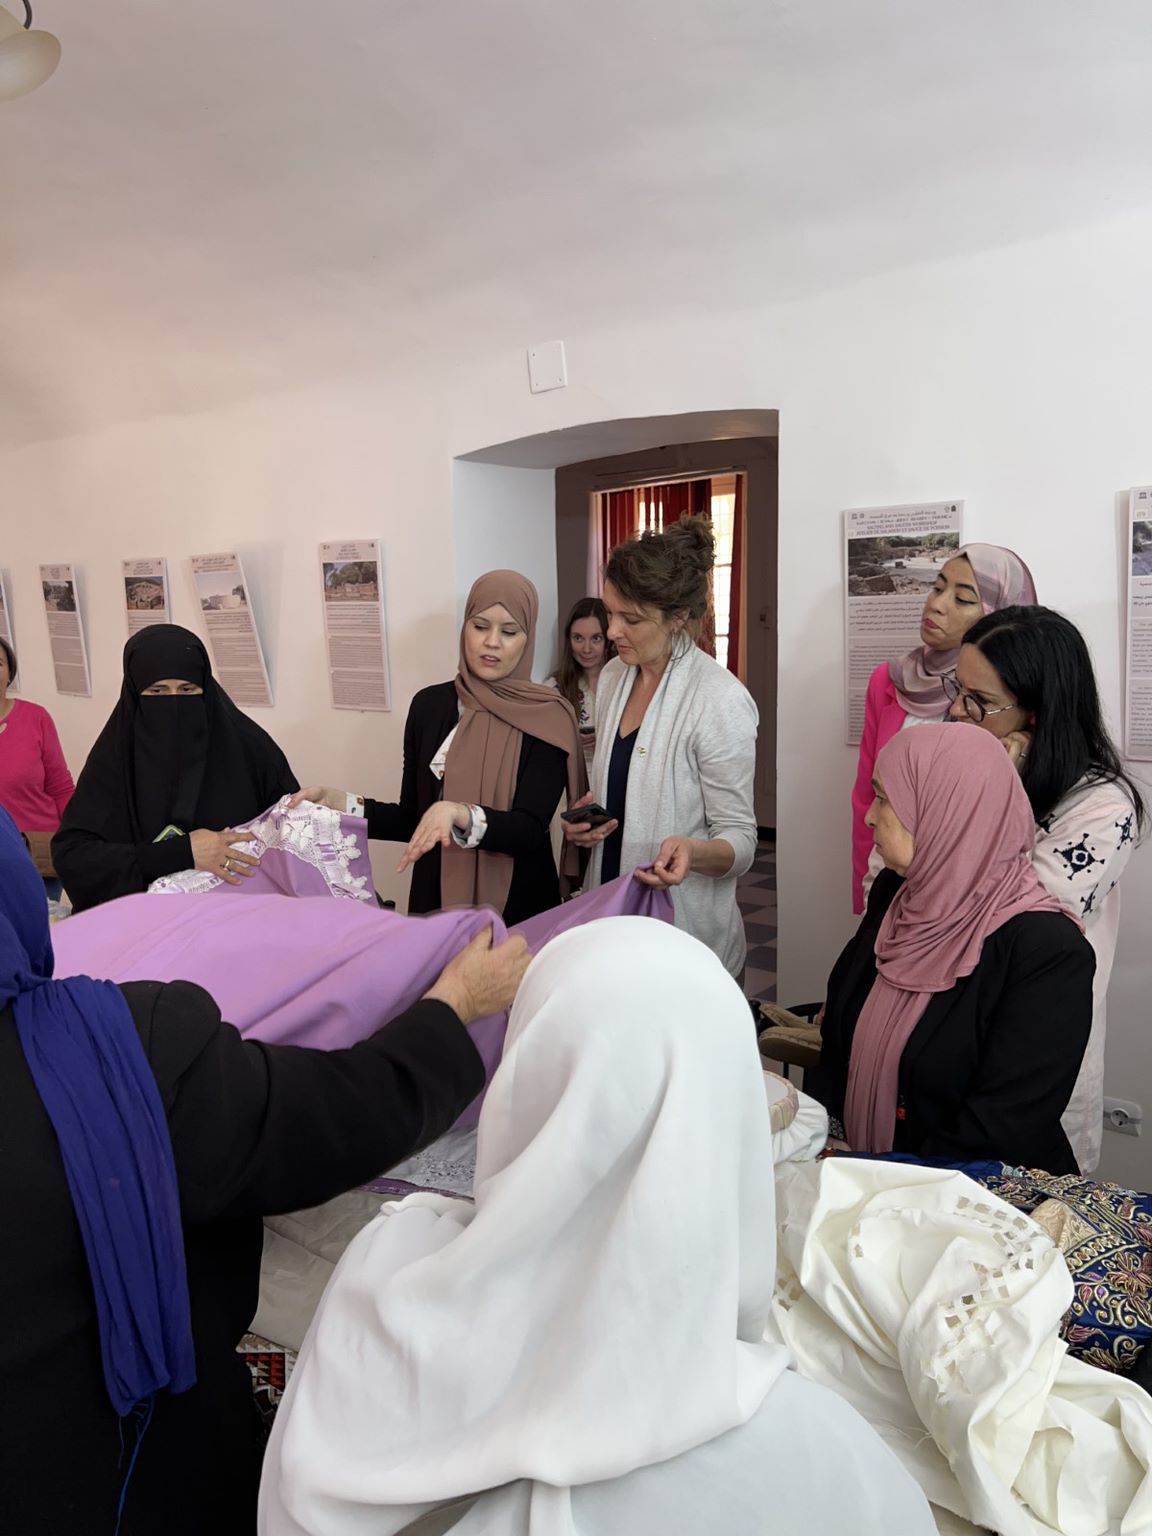 Visiting American Artist Hillary Waters Fayle visited Tipaza outside Algiers where she spoke with a group of local artisan women about their work.